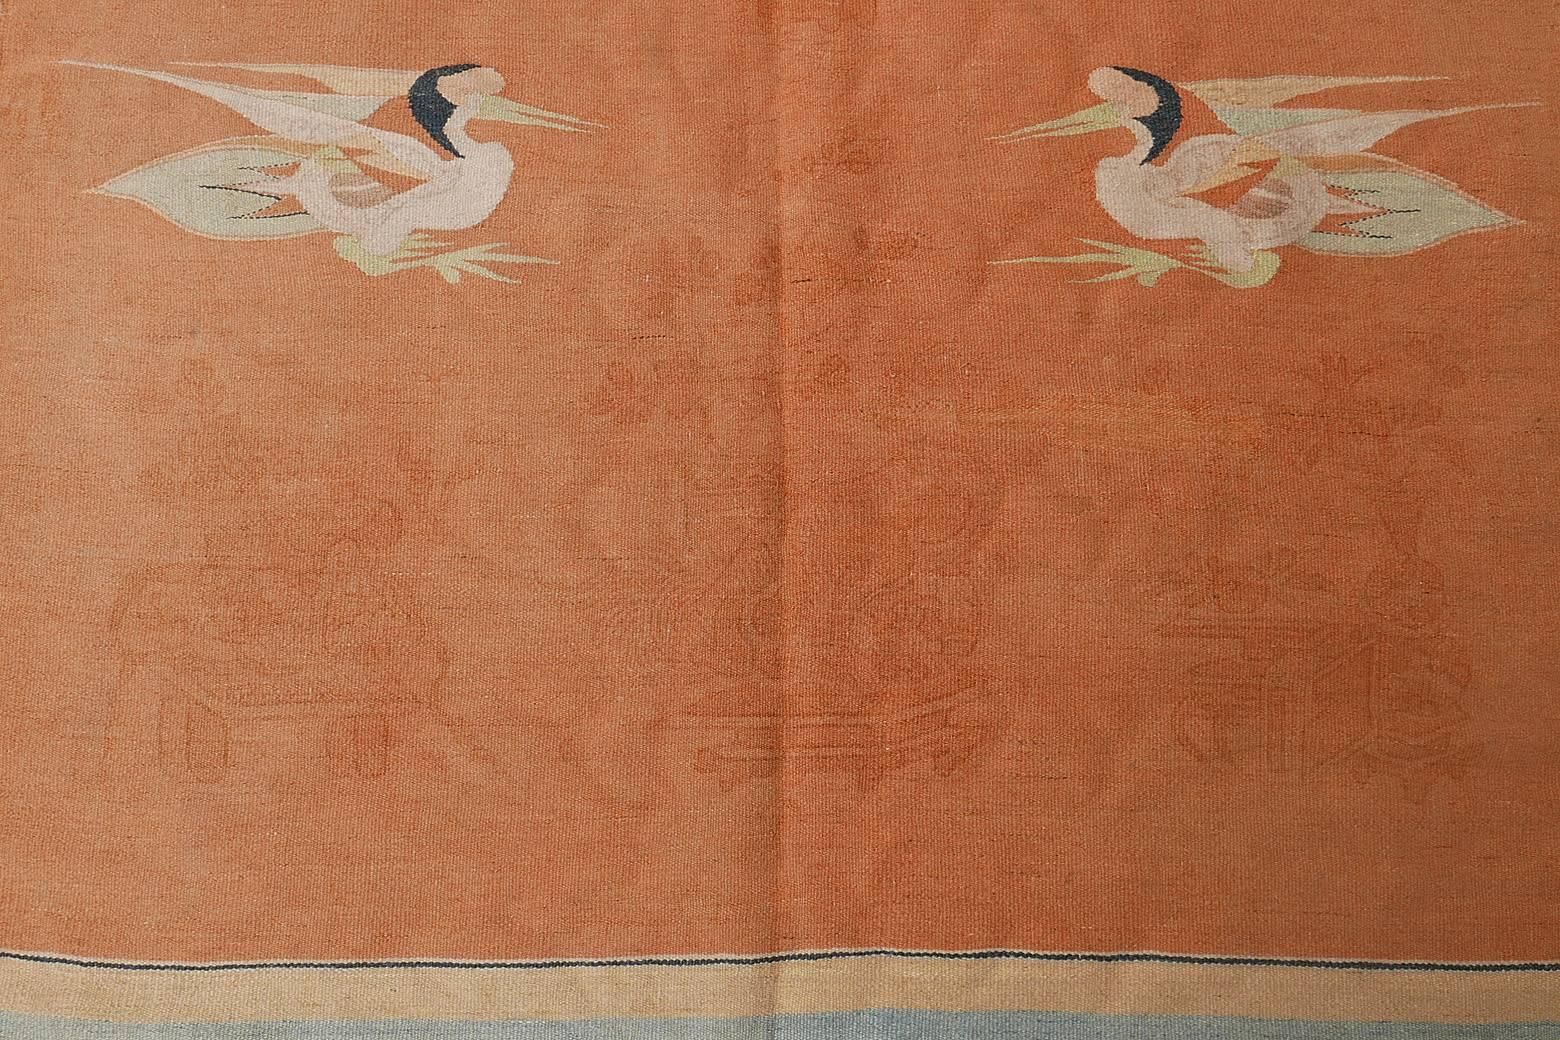 Early 20th Century Rare Antique Mongolian Flat-Weave Khelim with Cranes For Sale